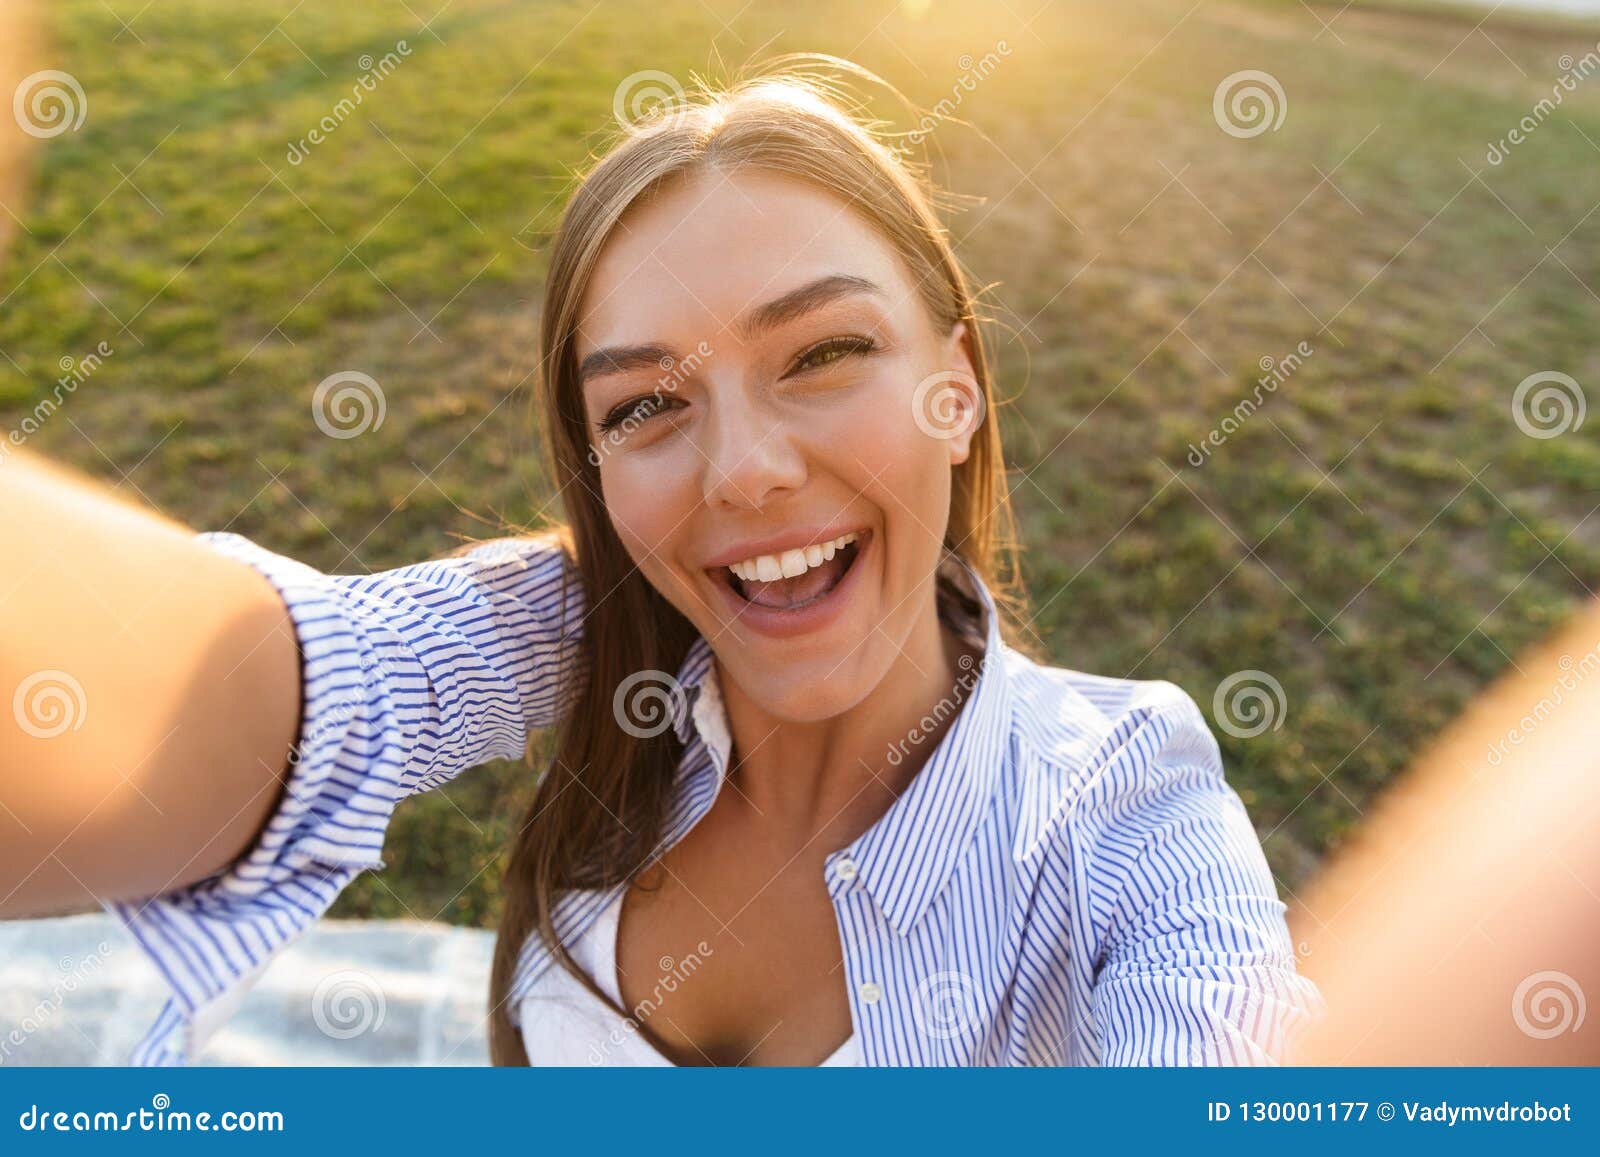 Close Up Of An Excited Young Woman Taking A Selfie Stock Image Image Of Cheerful Girl 130001177